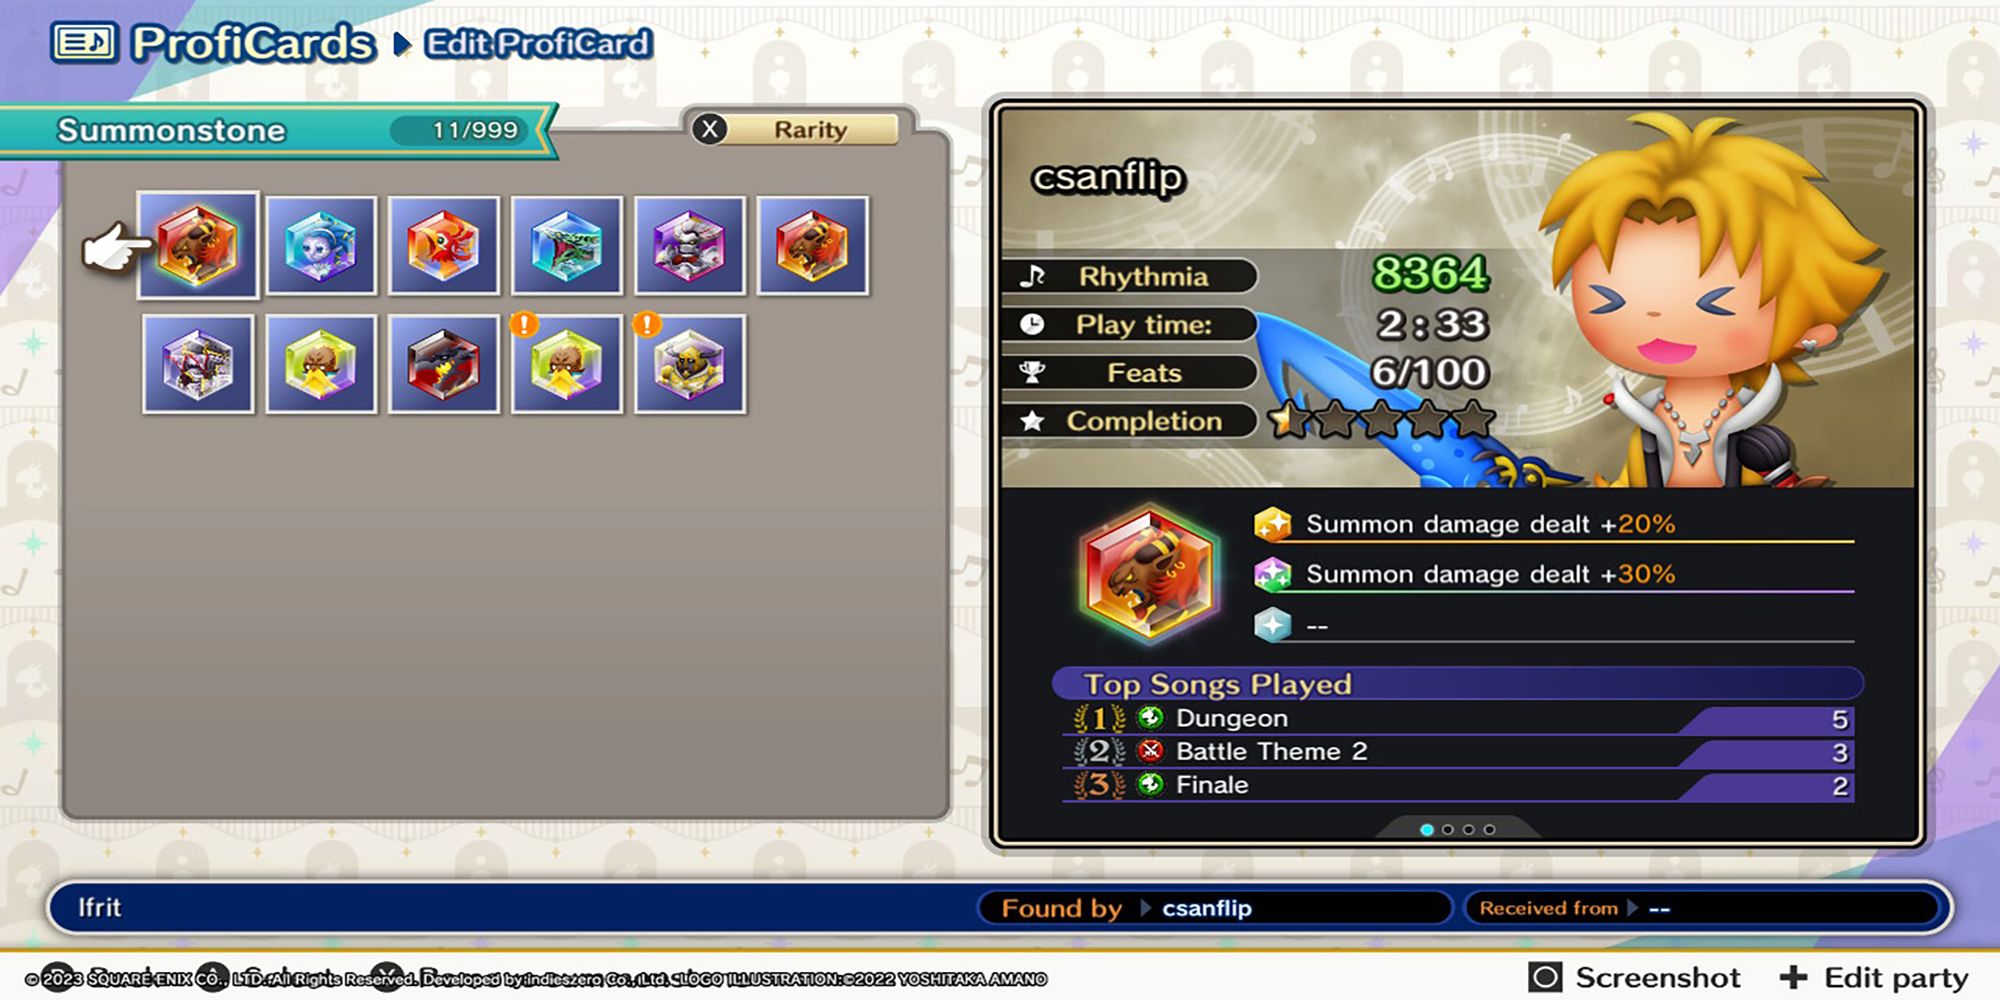 The summonstone section of the ProfiCard menu from Theatrhythm: Final Bar Line.